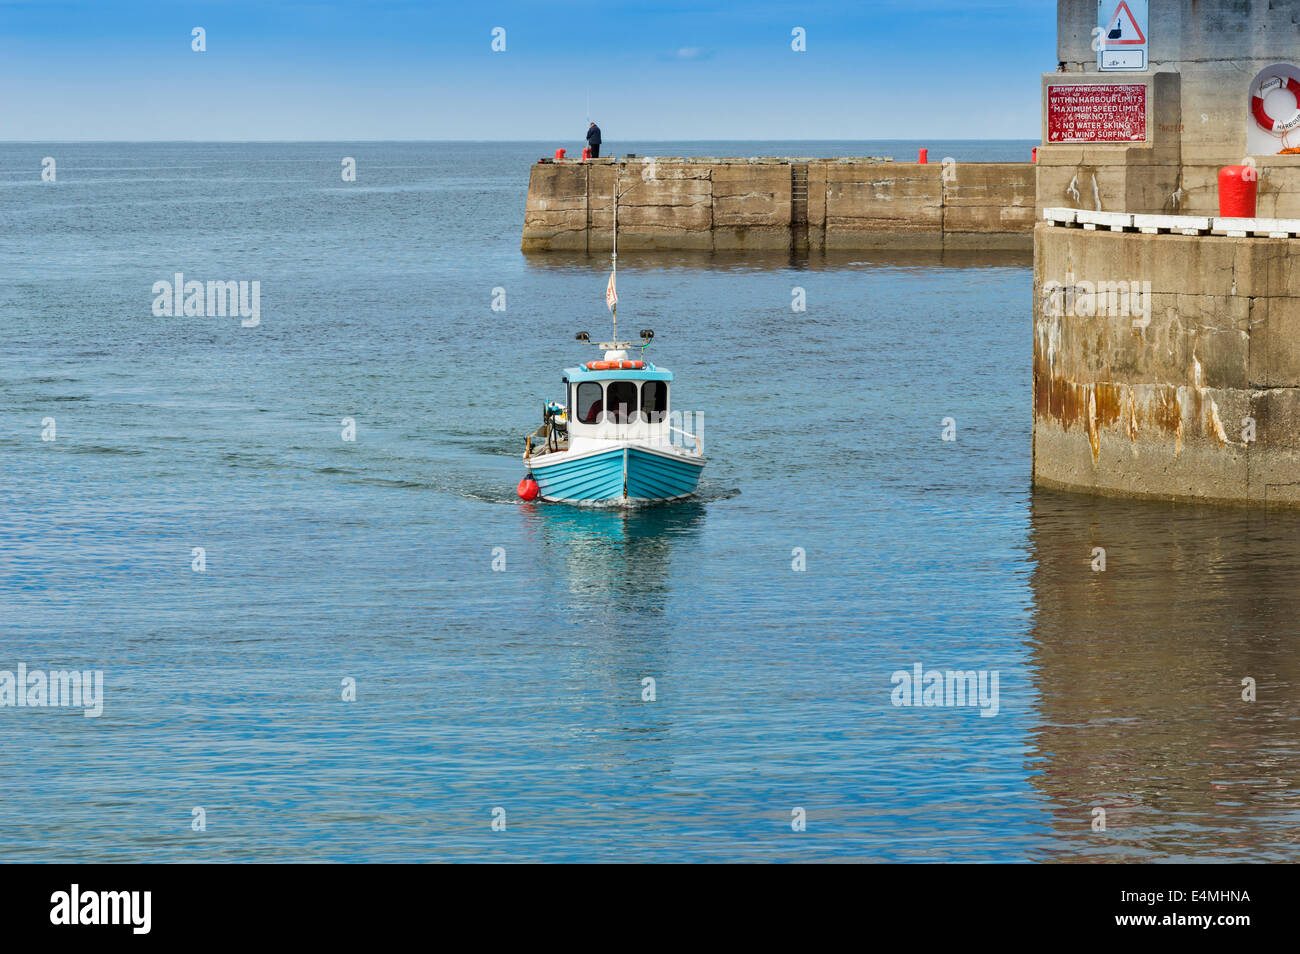 BLUE CRAB OR LOBSTER BOAT ENTERING FINDOCHTY HARBOUR MORAY COAST SCOTLAND Stock Photo